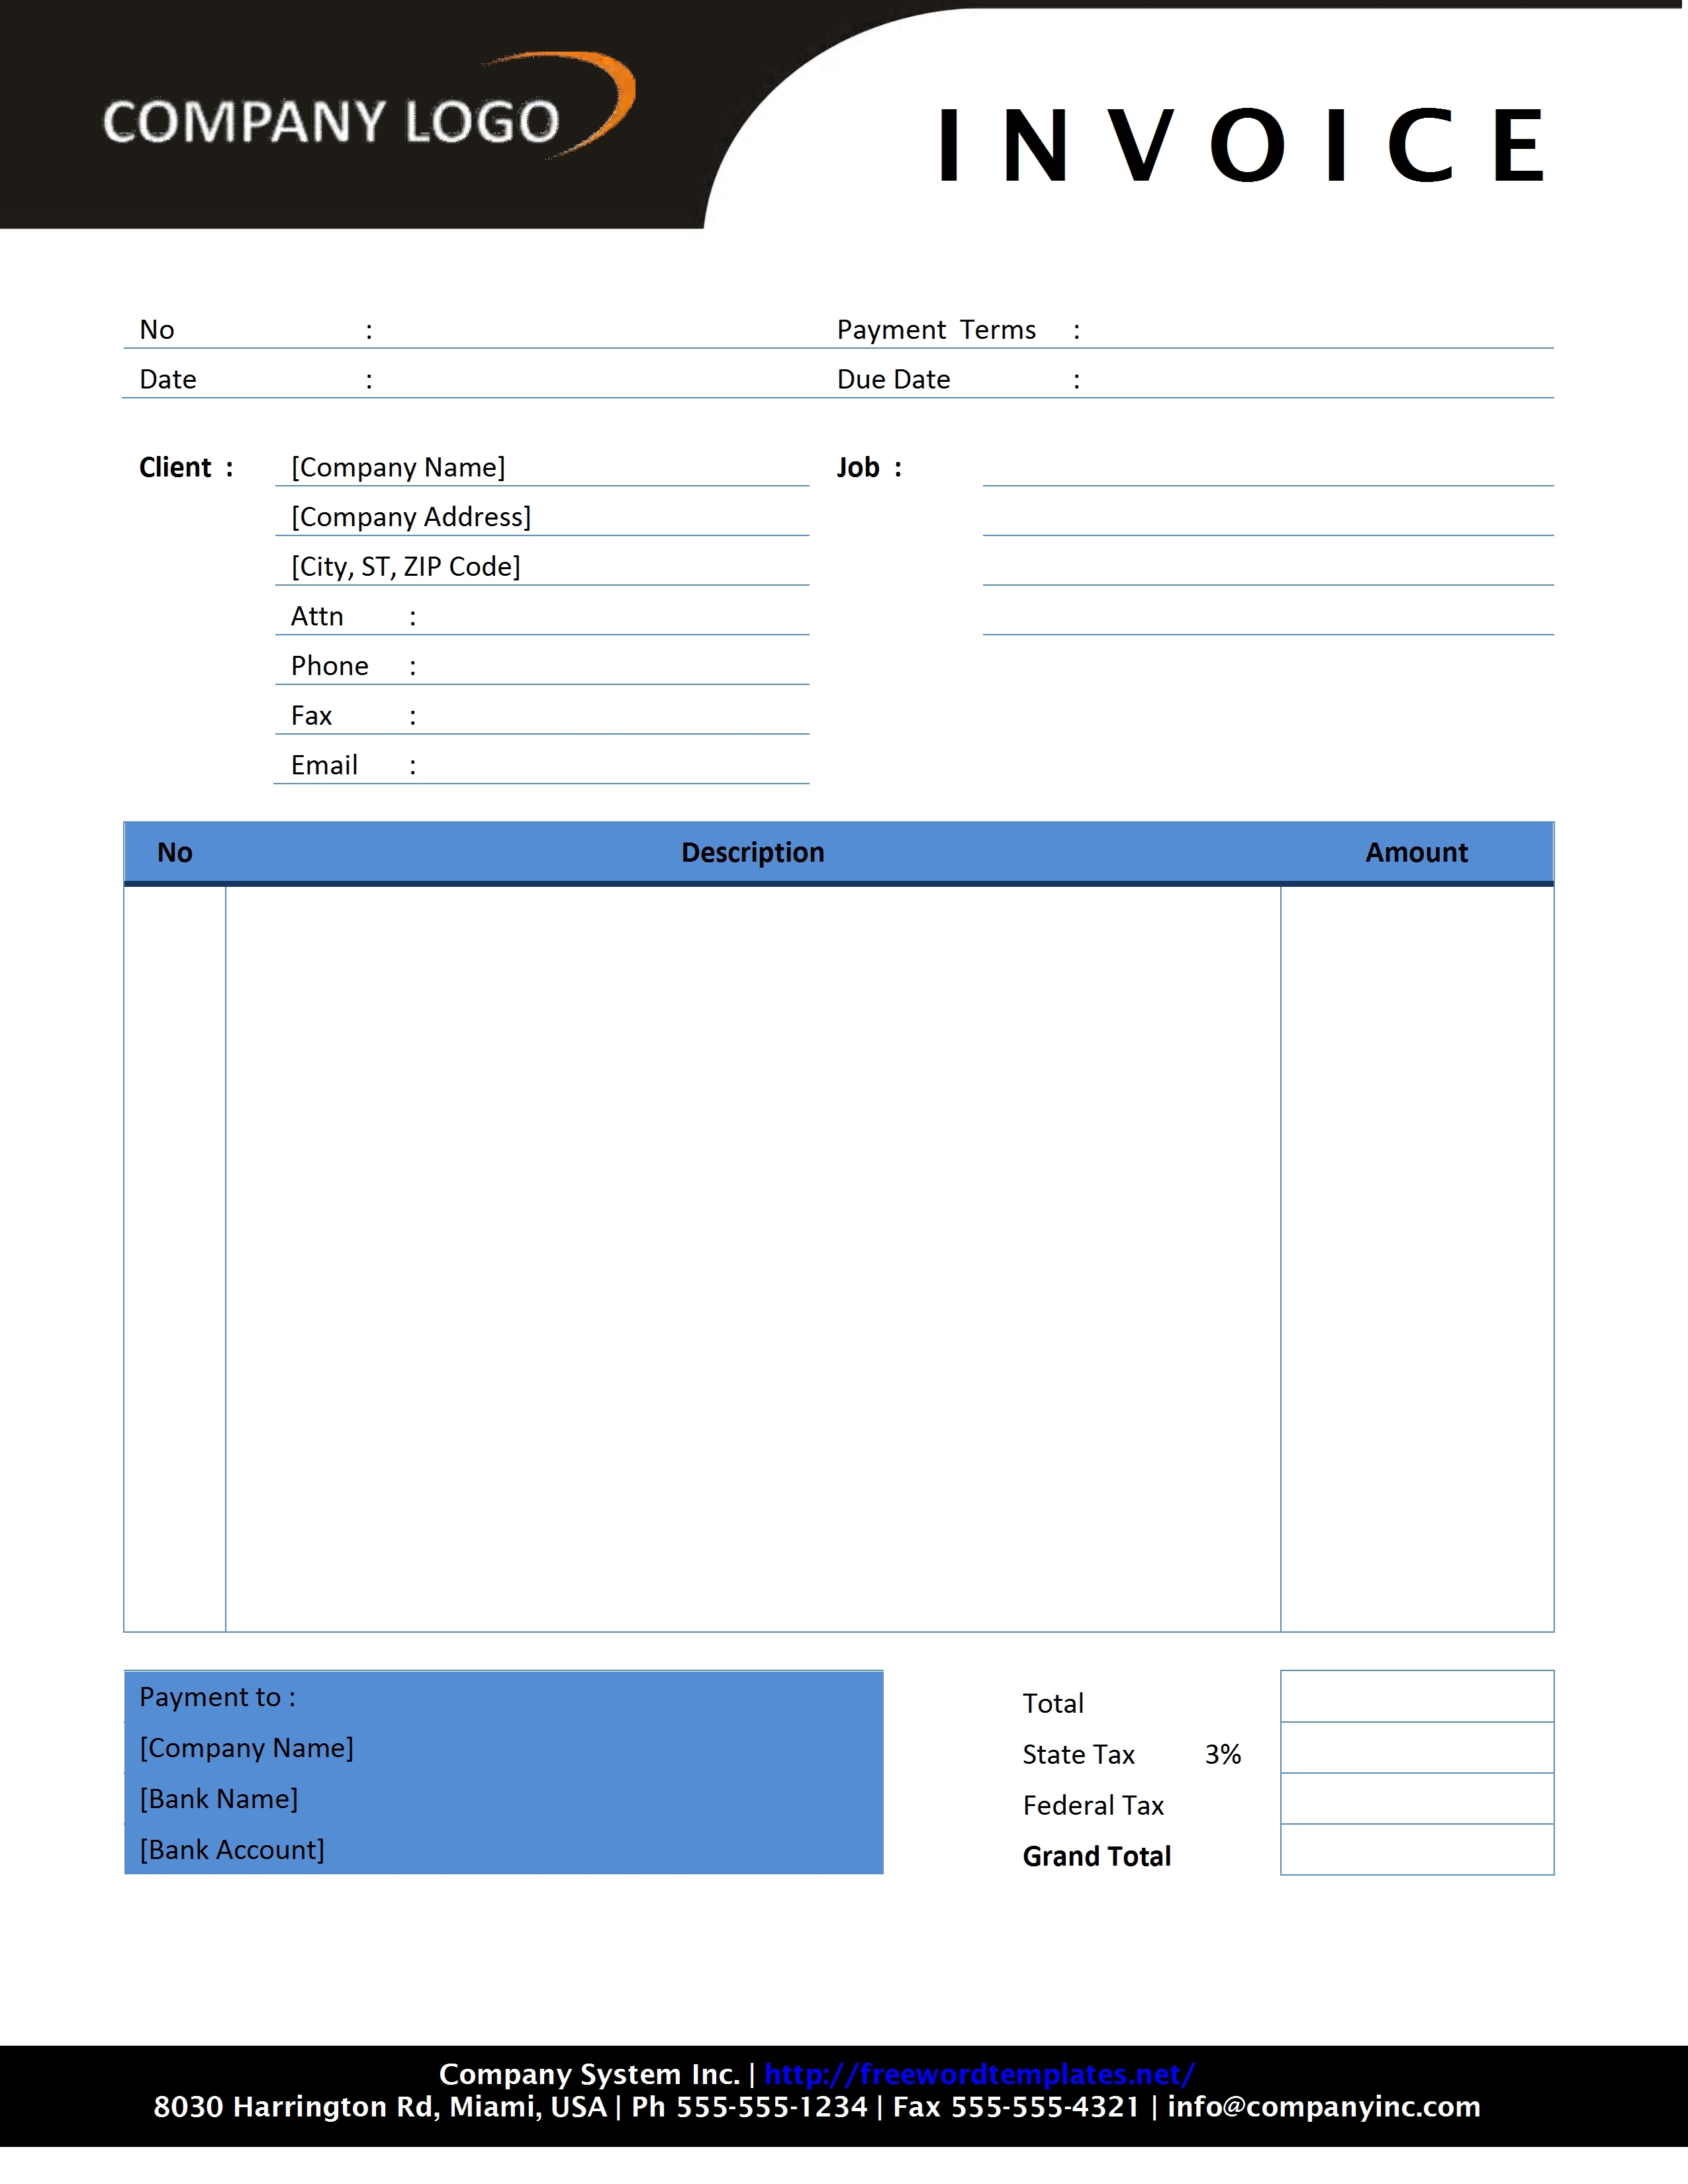 invoice in word free invoice template microsoft word invoice sample invoice word